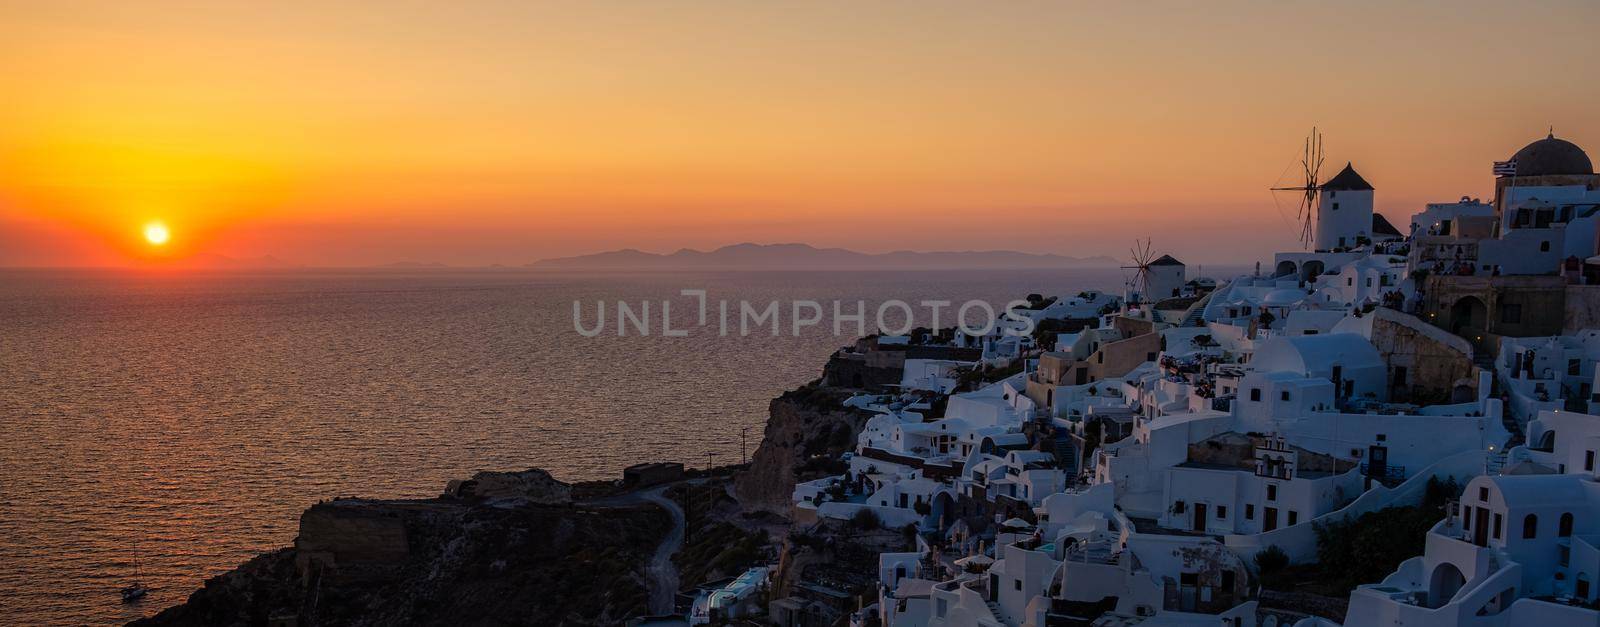 Oia village Santorini with blue domes and whitewashed house during sunset at the Island of Santorini Greece by fokkebok